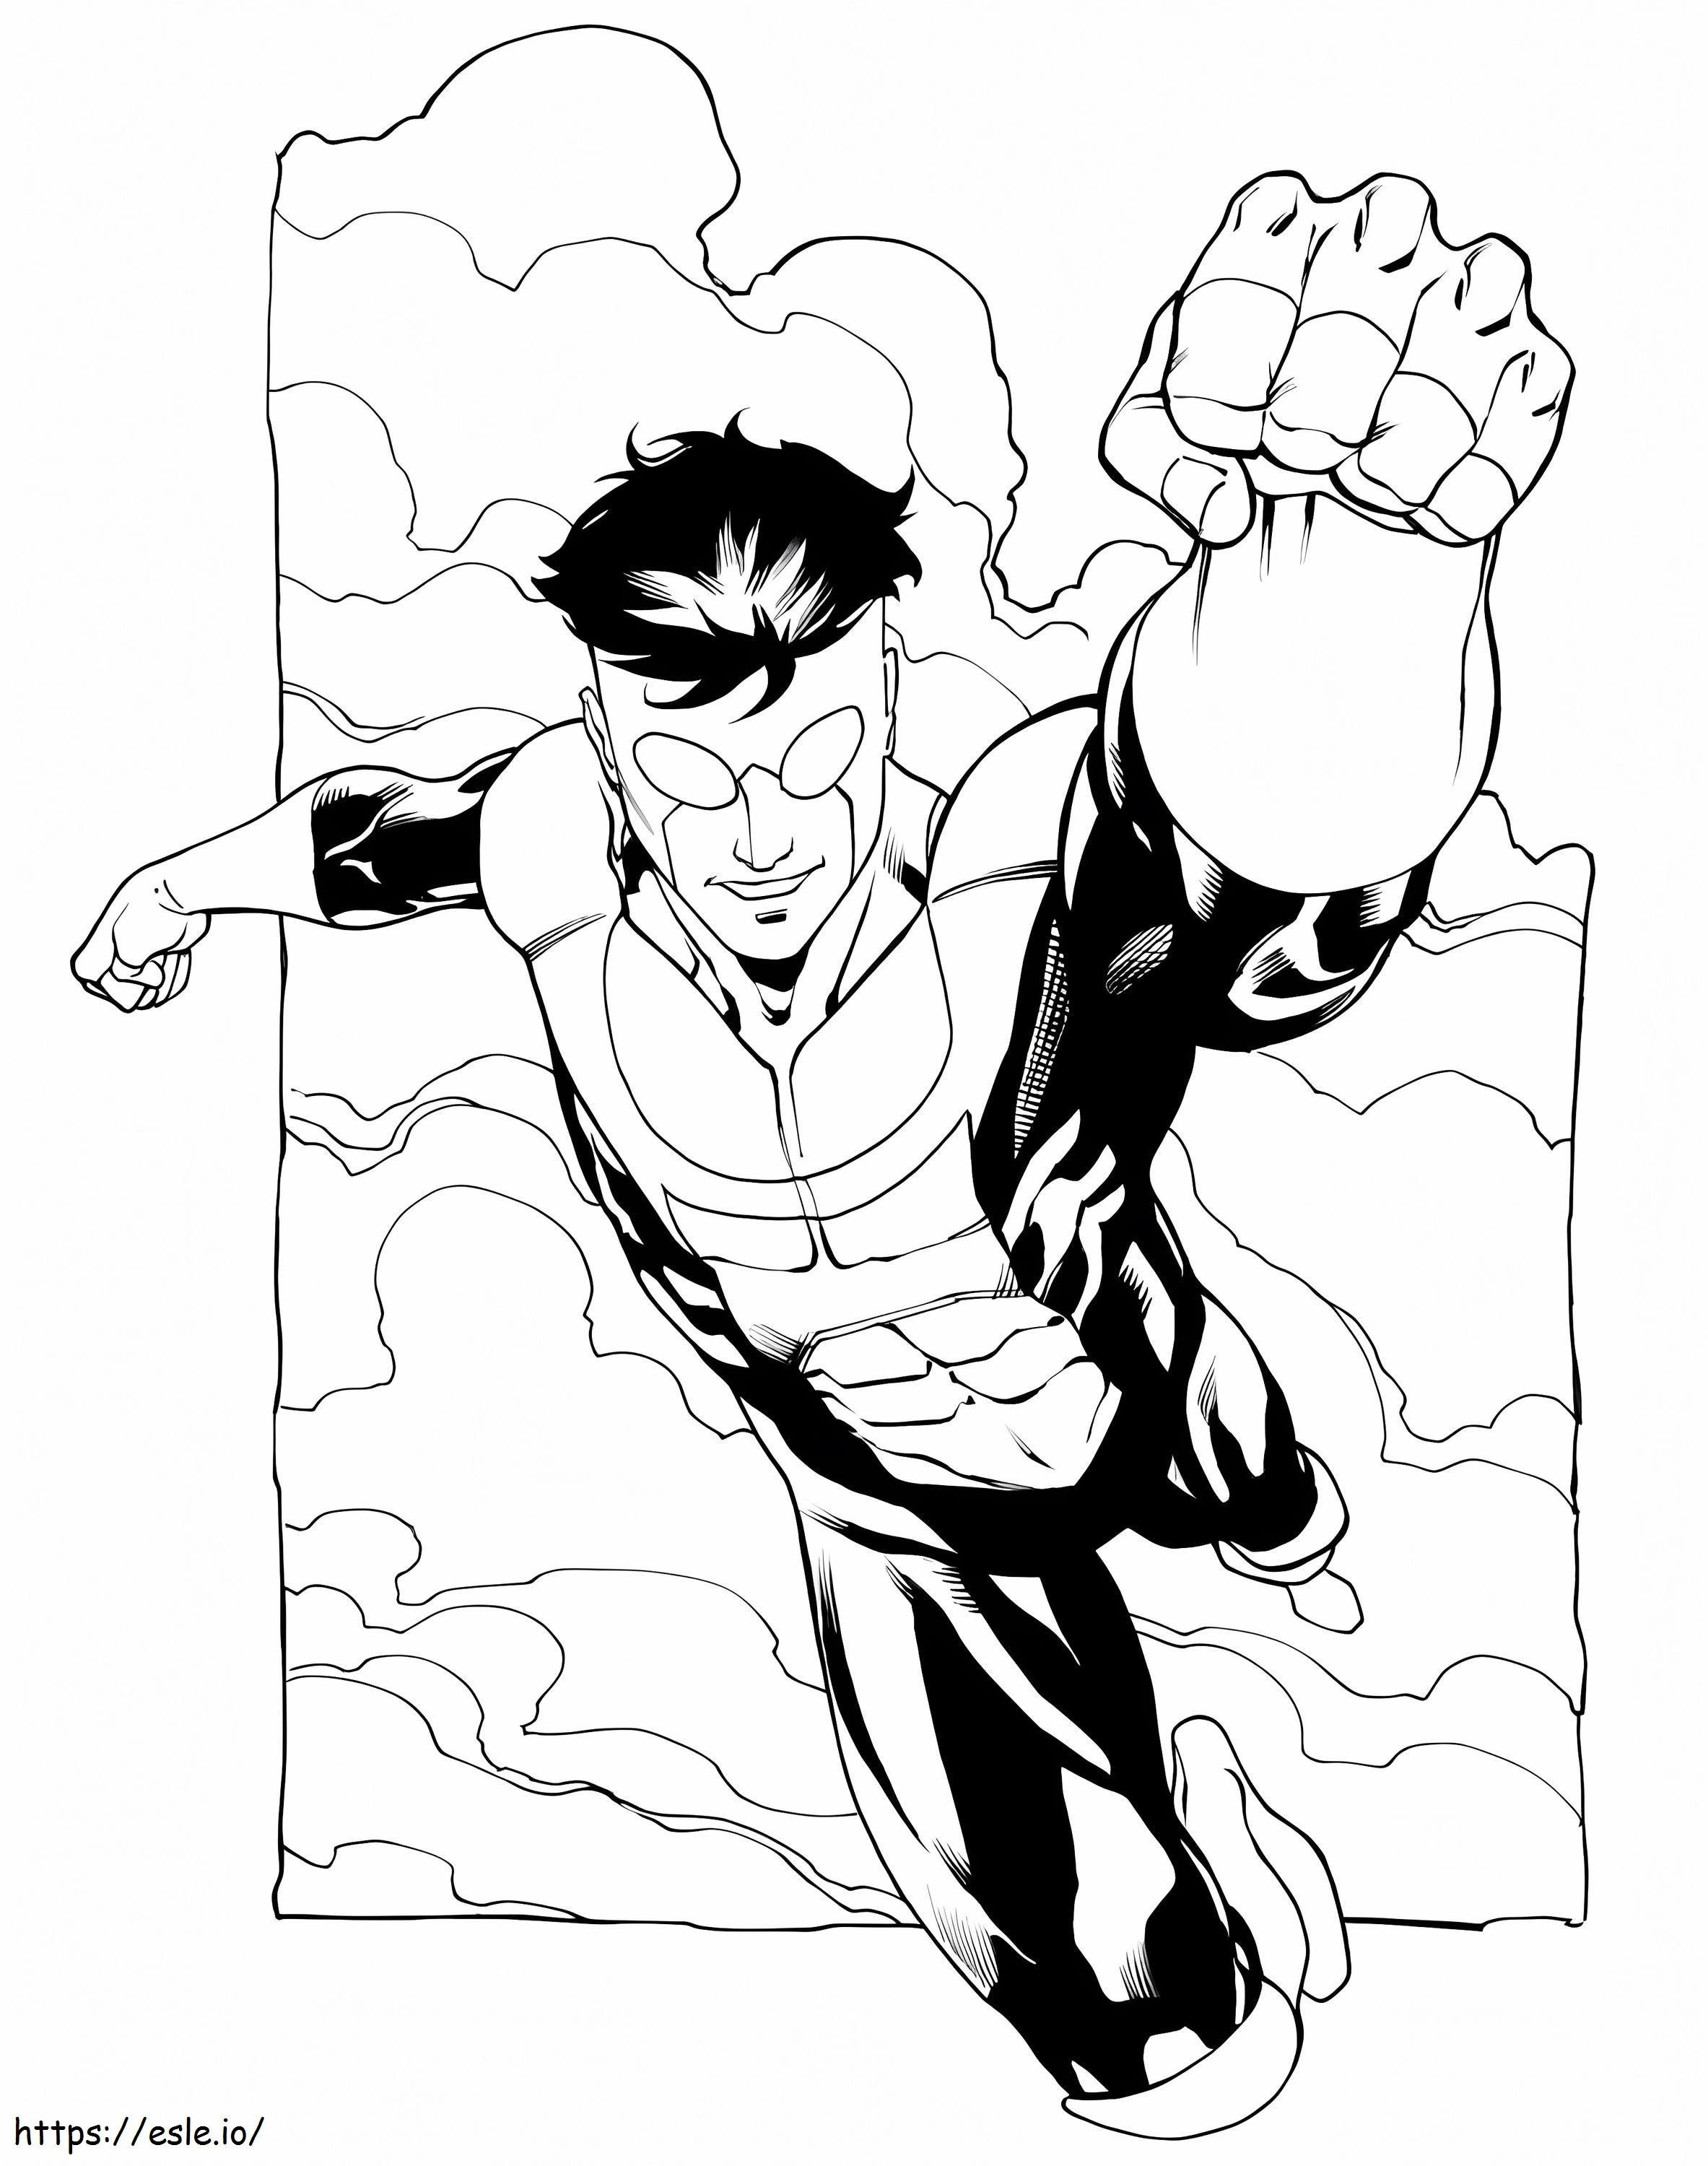 Cool Invincible coloring page